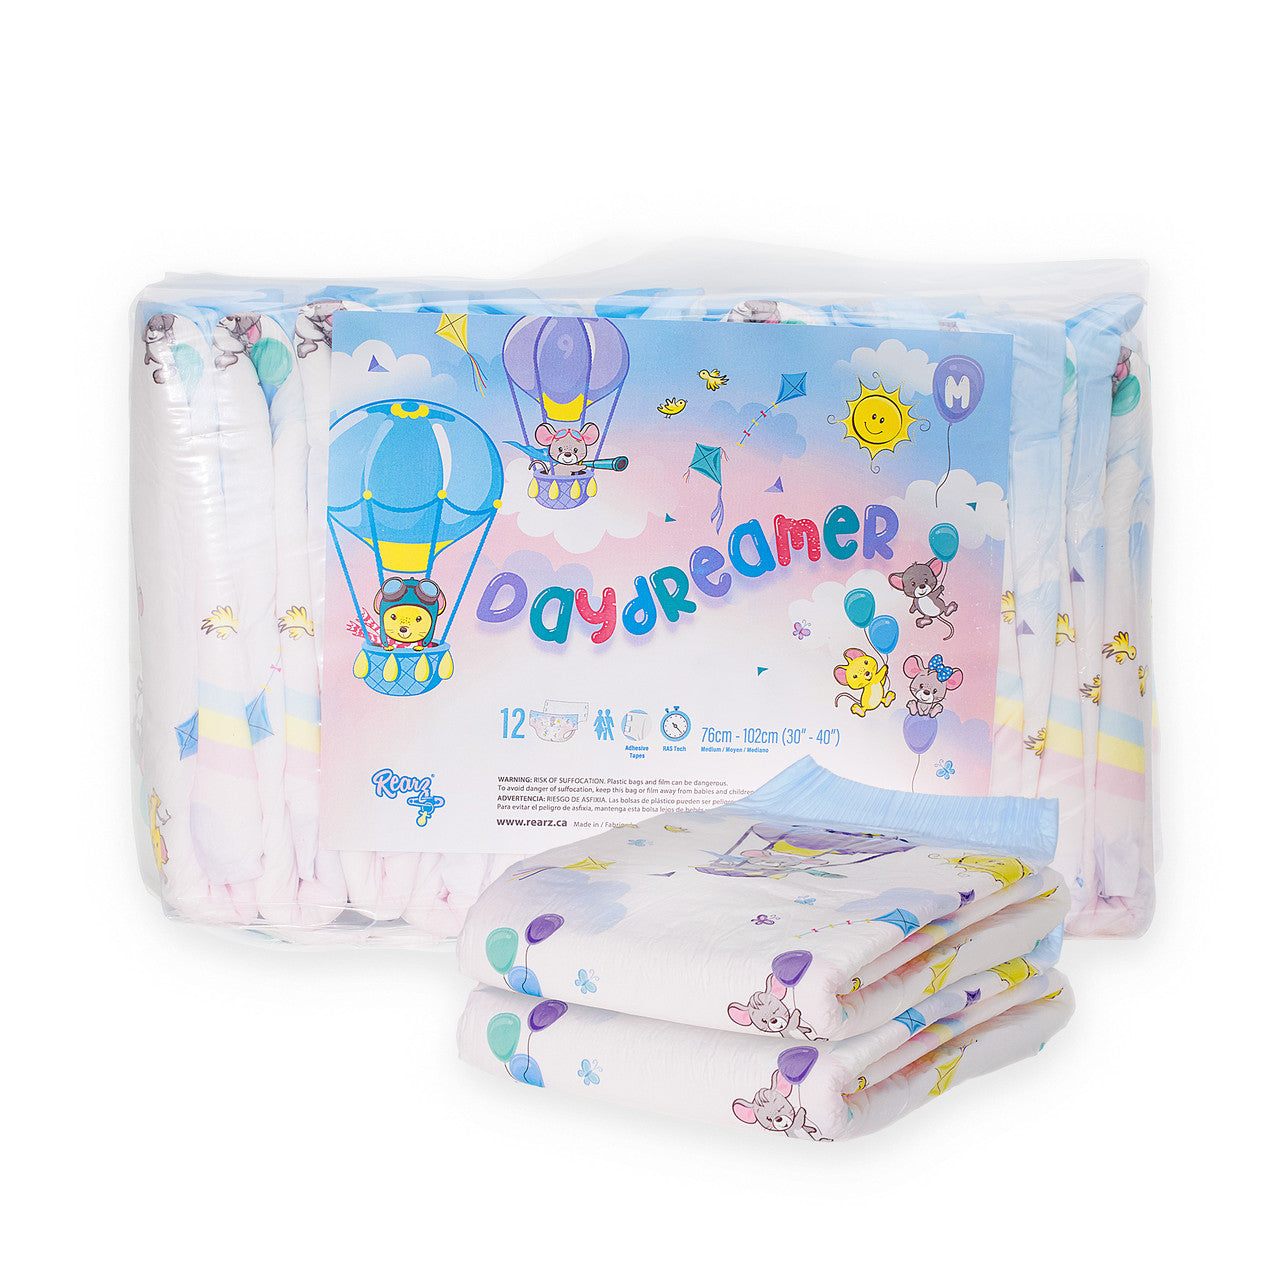 Package of Daydreamer disposable diapers